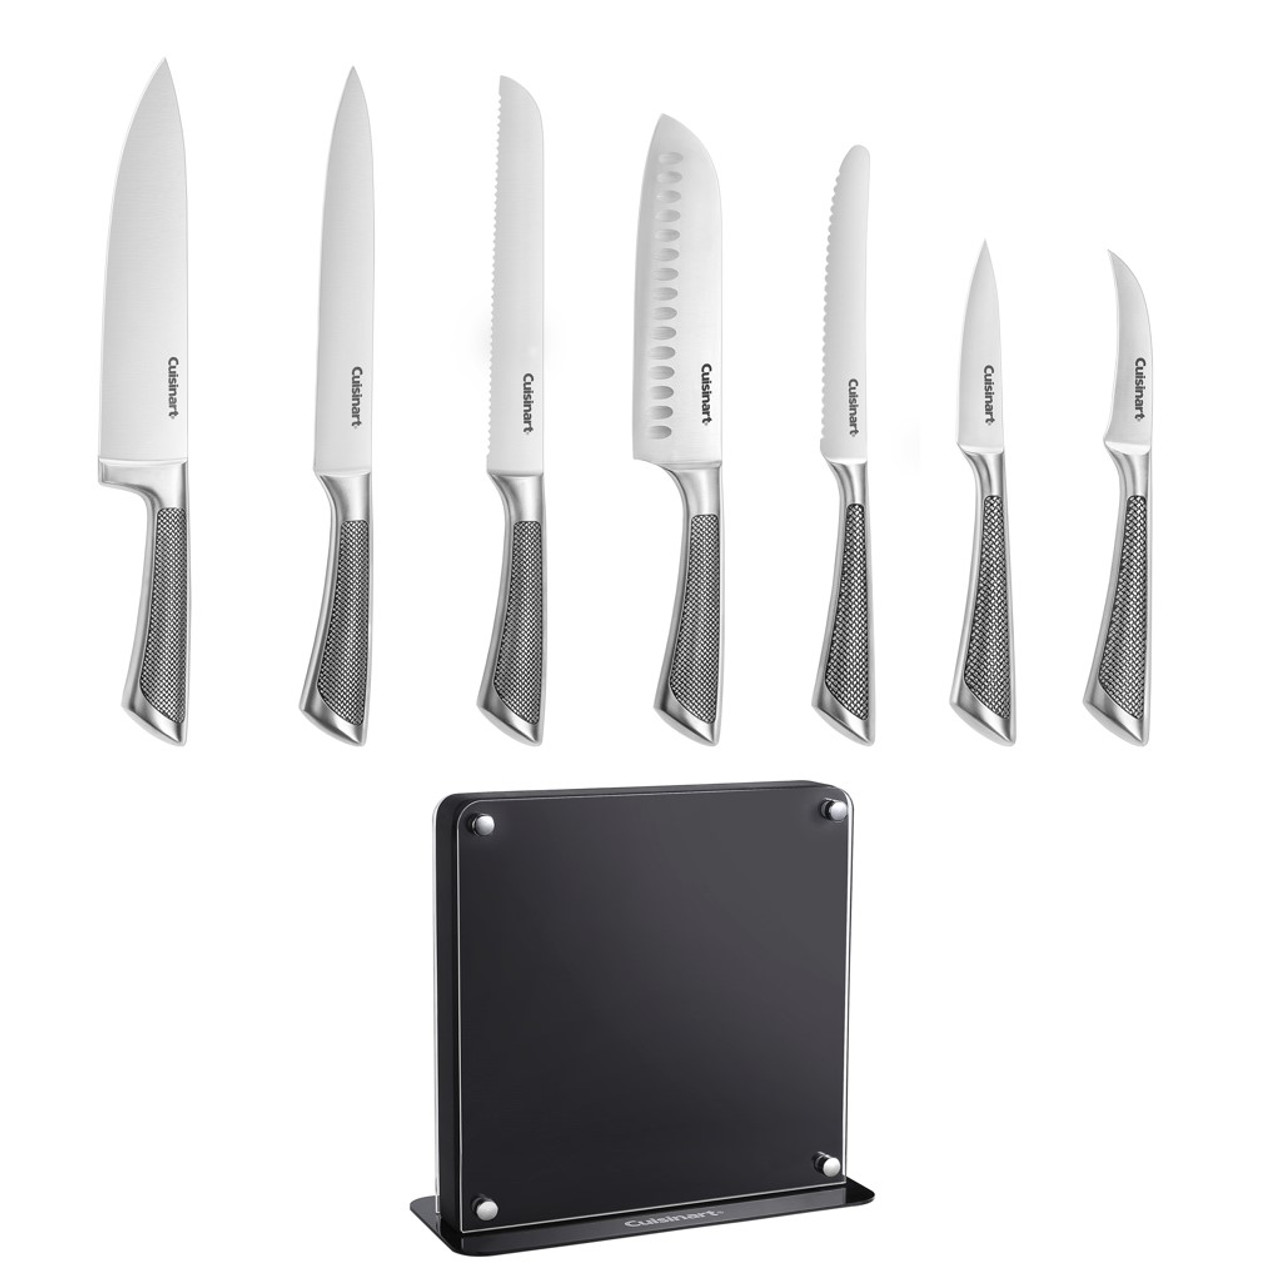  Cuisinart C77SS-17P 17-Piece Artiste Collection Cutlery Knife  Block Set, Stainless Steel Includes Cuisinart Bamboo Cutting Board and Measuring  Spoons: Home & Kitchen